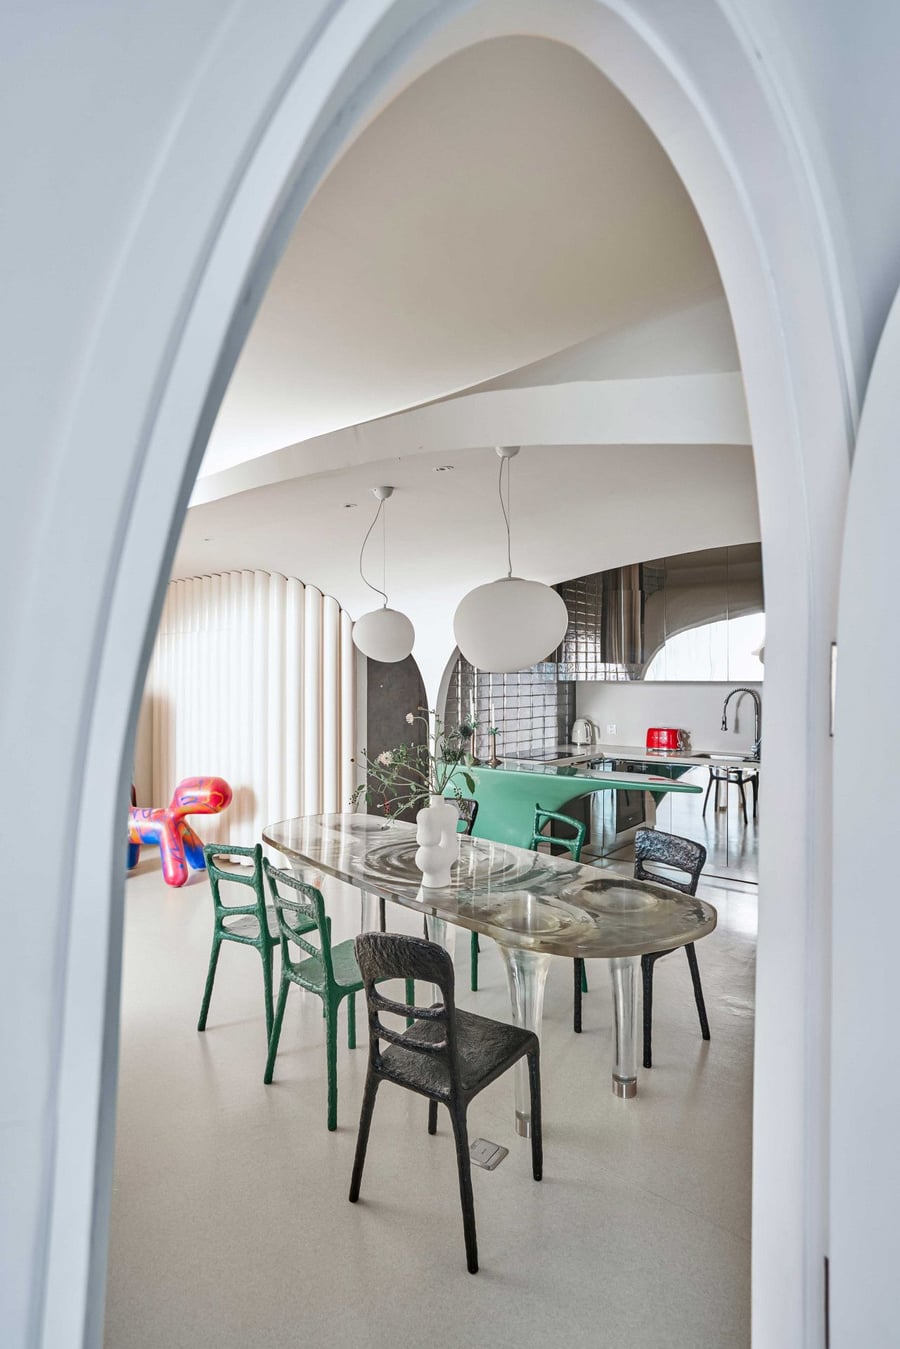 View into the Dreamscape apartment's dining area from behind a cruvy archway. 